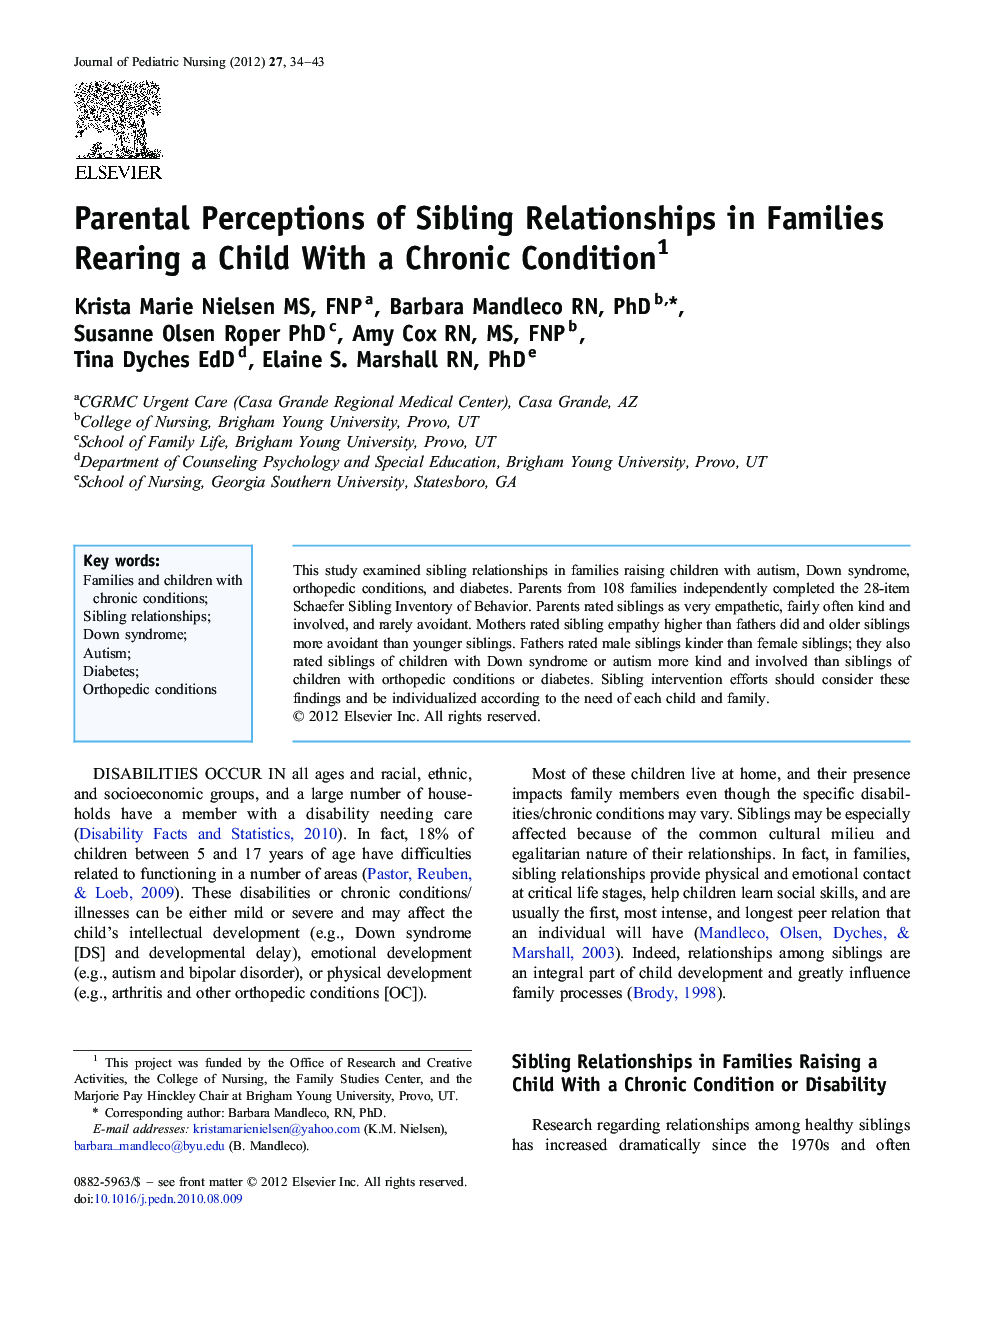 Parental Perceptions of Sibling Relationships in Families Rearing a Child With a Chronic Condition 1